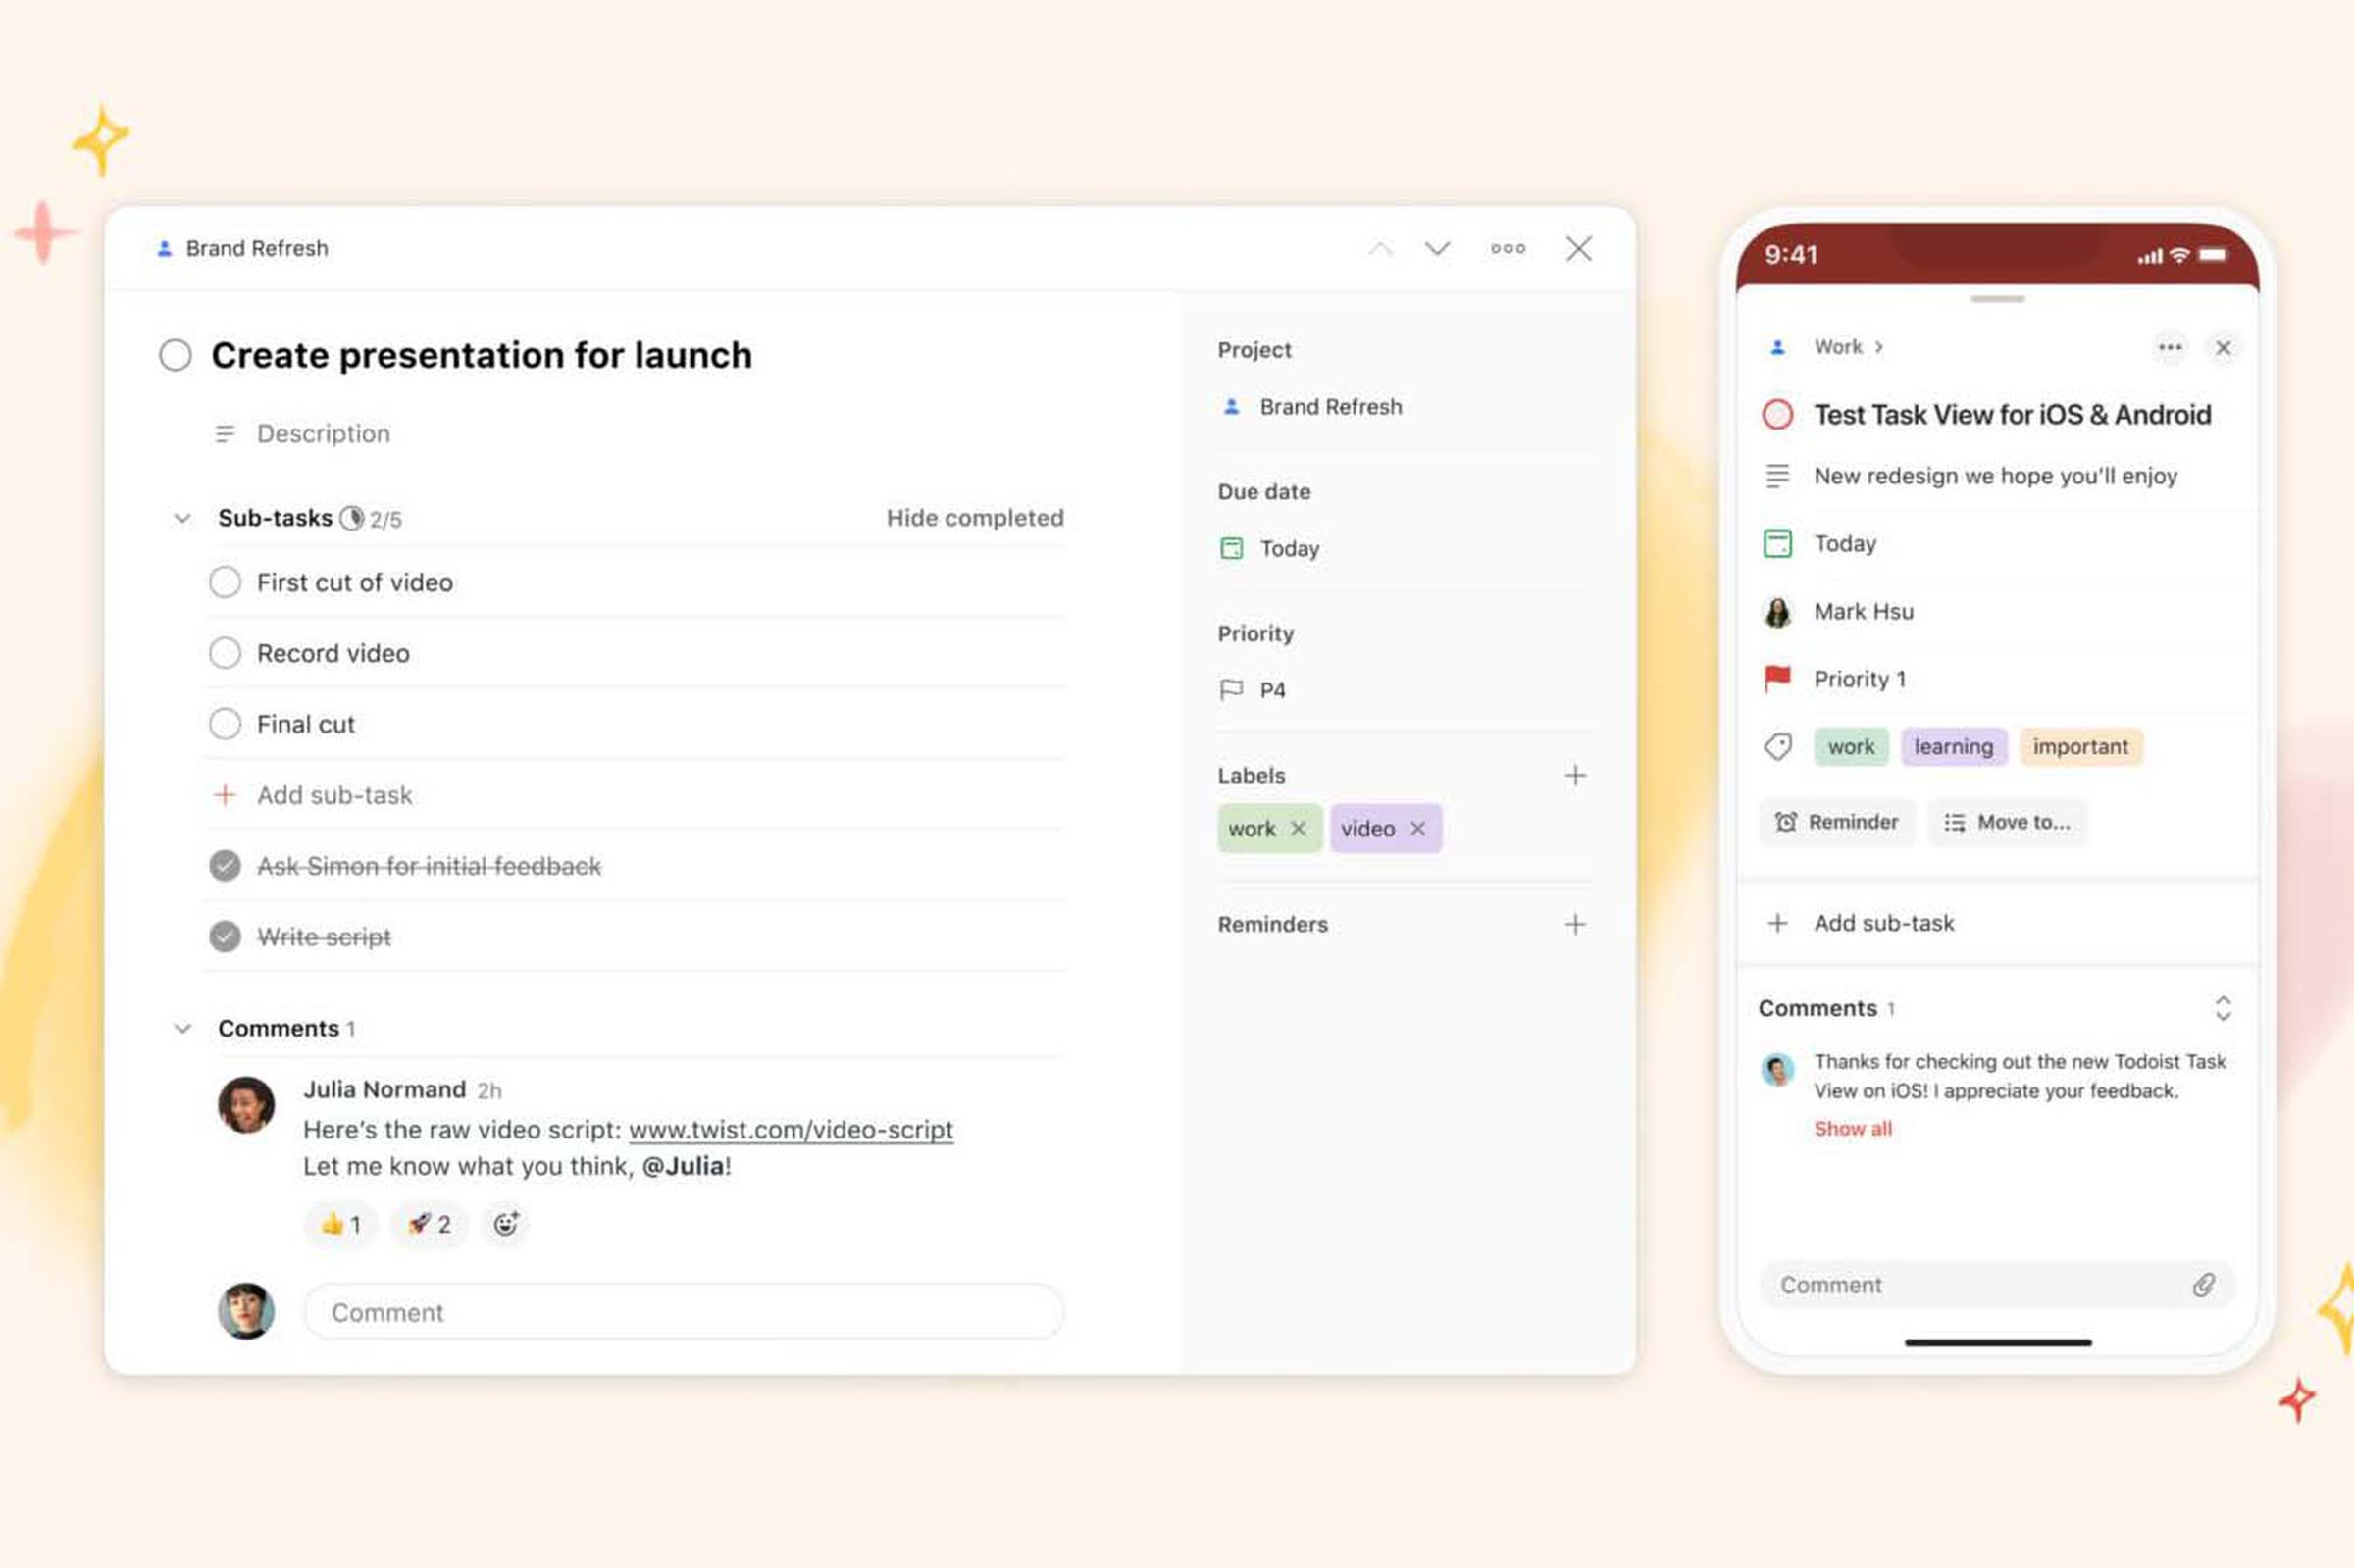 Sceenshots for Todoist's desktop and mobile interfaces.